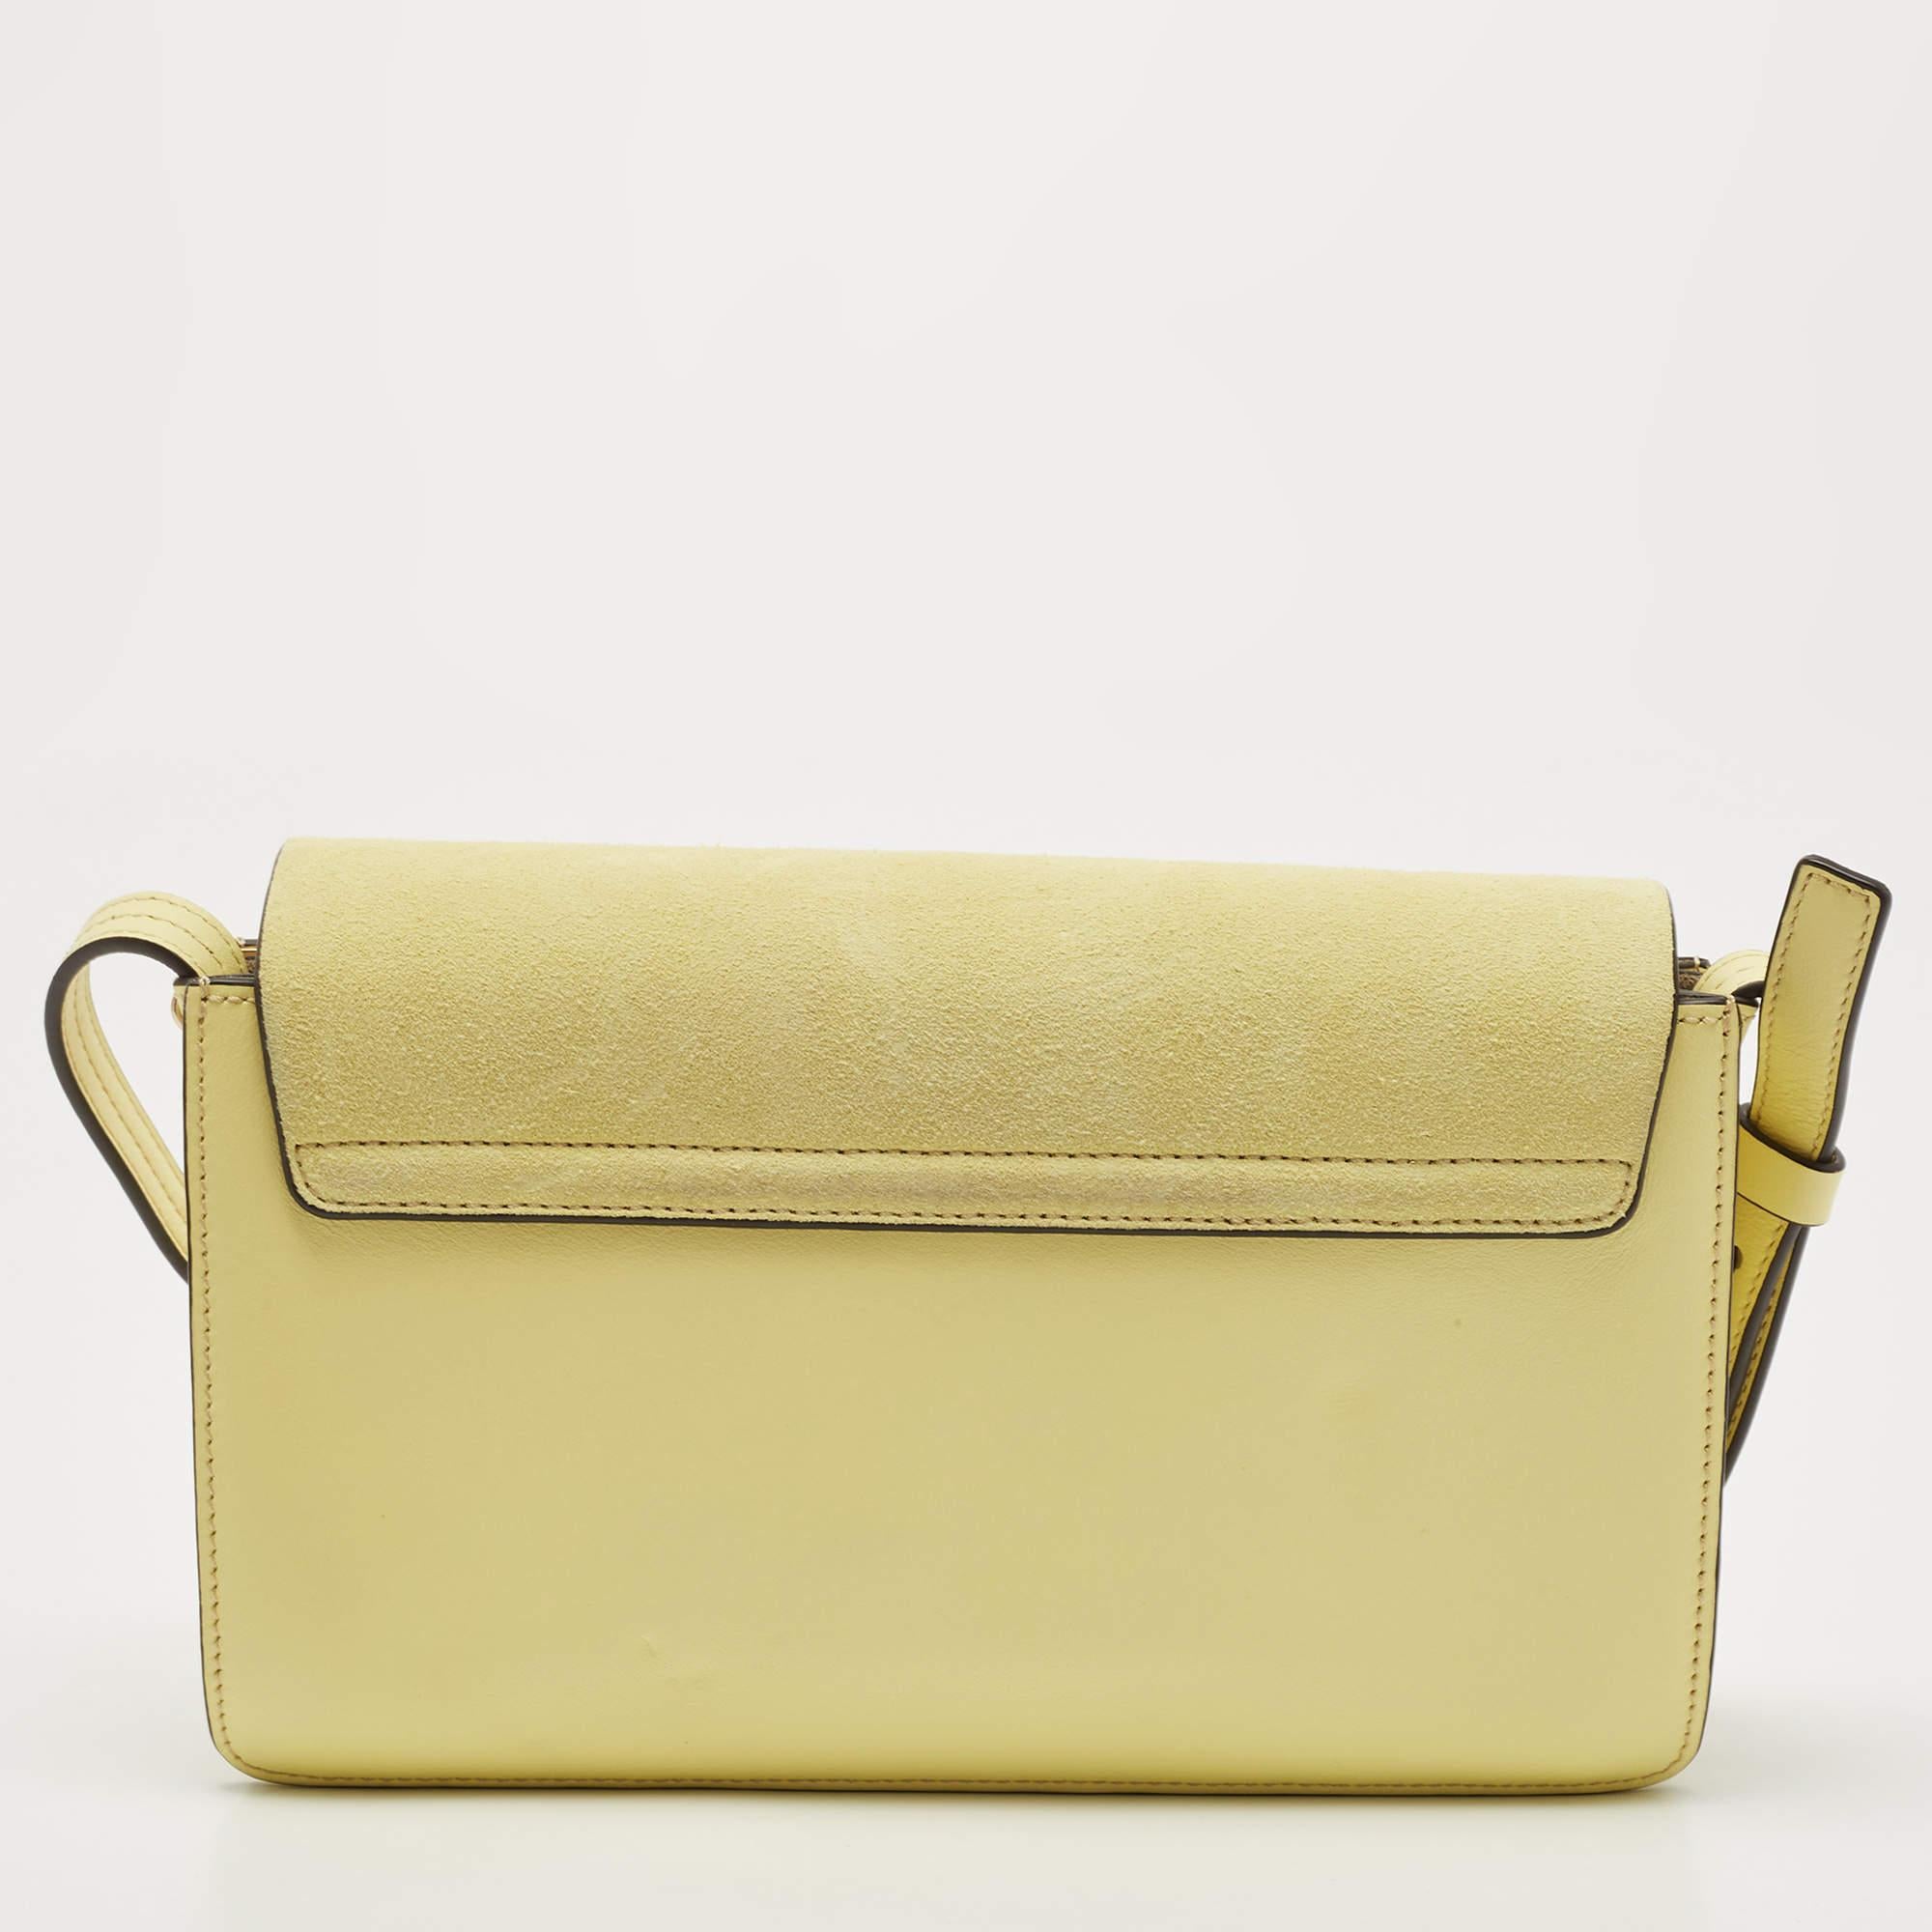 You are going to love owning this Faye shoulder bag from Chloe, as it is well-made and brimming with luxury. The bag has been crafted from leather and designed with a suede flap with chain detail and well-sized suede compartments for your